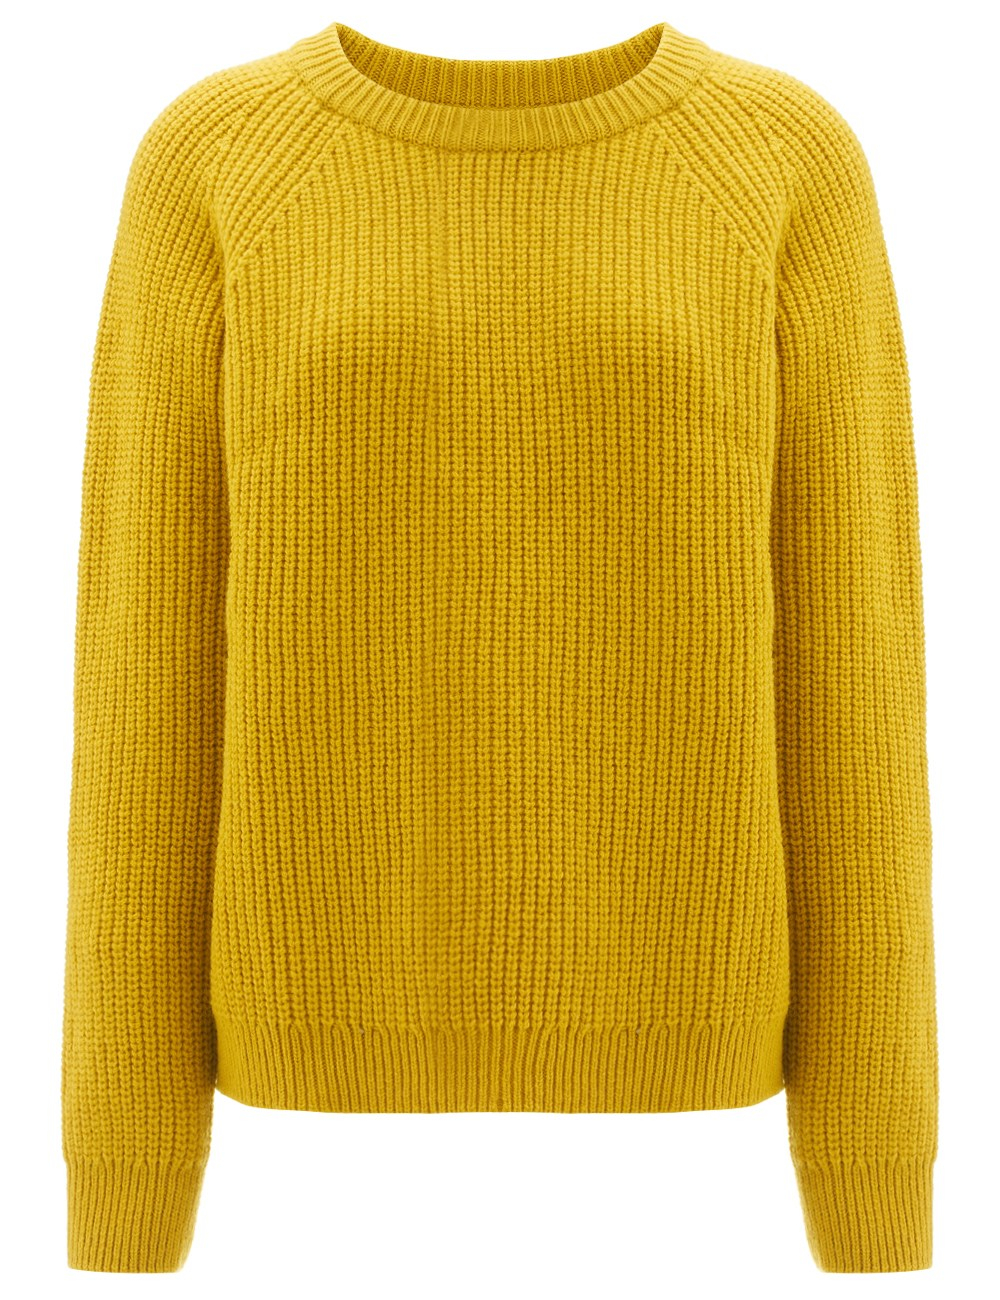 Chinti & Parker Mustard Lambswool Crew Neck Jumper in Yellow | Lyst